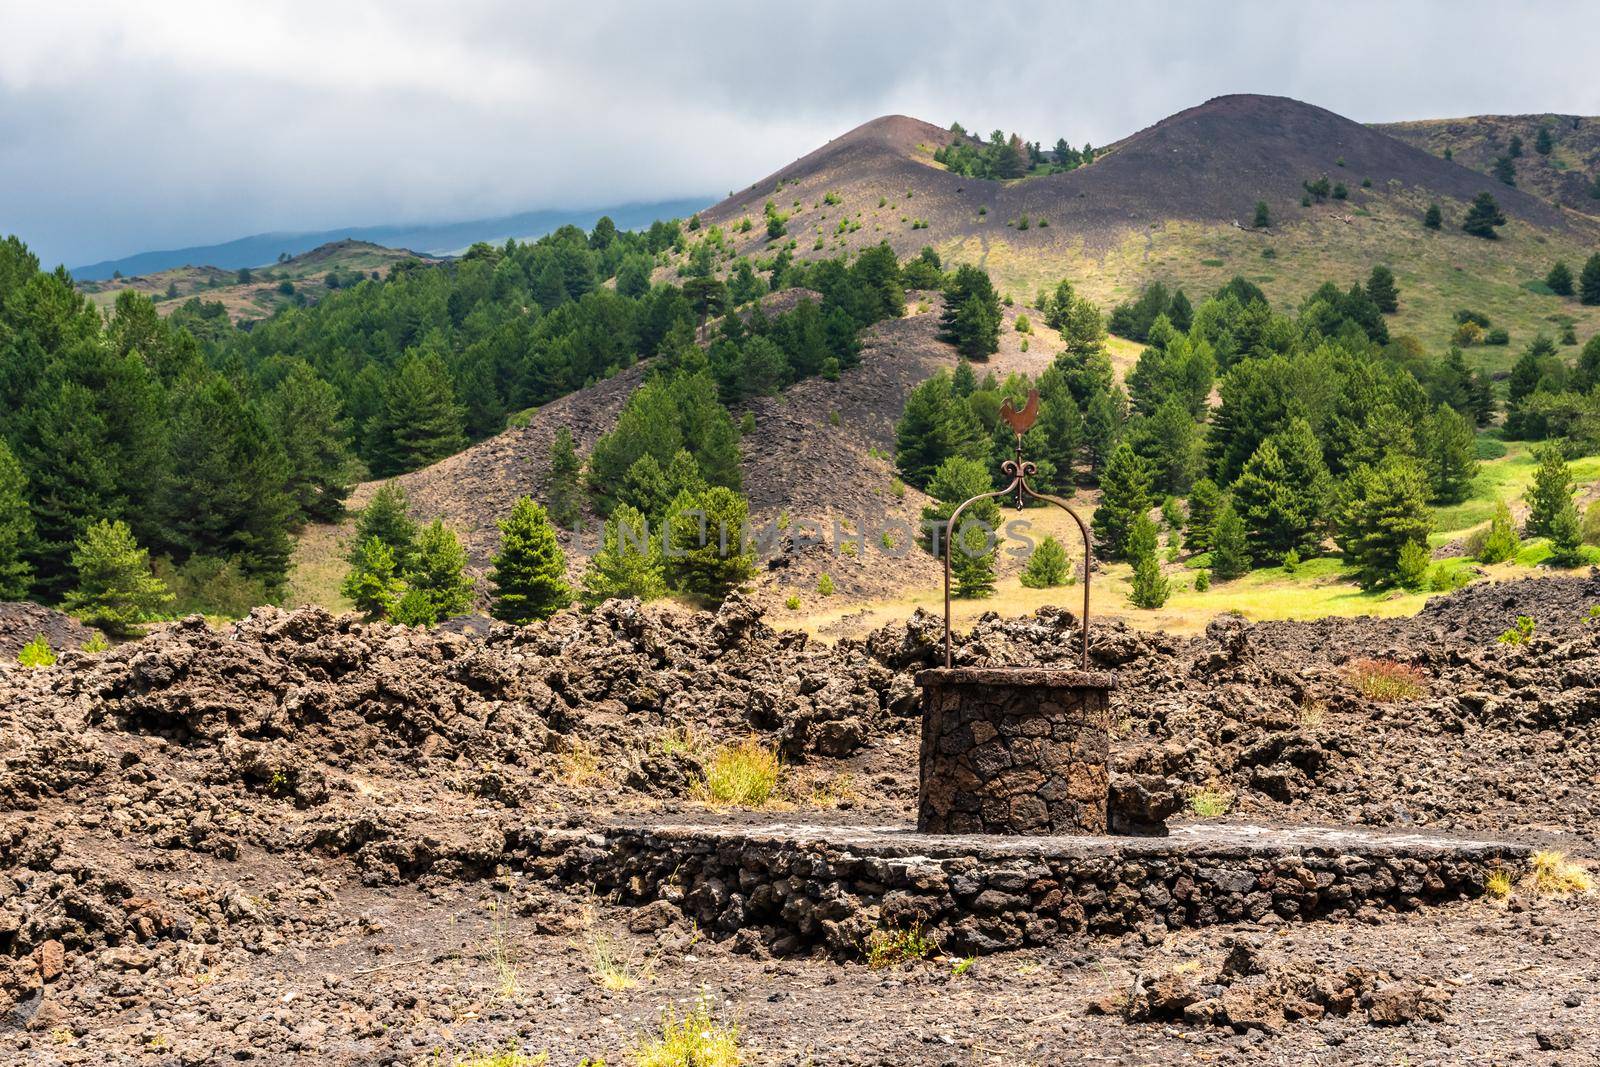 Santa Barbara refuge on Mount Etna built with lava stones, including the water well